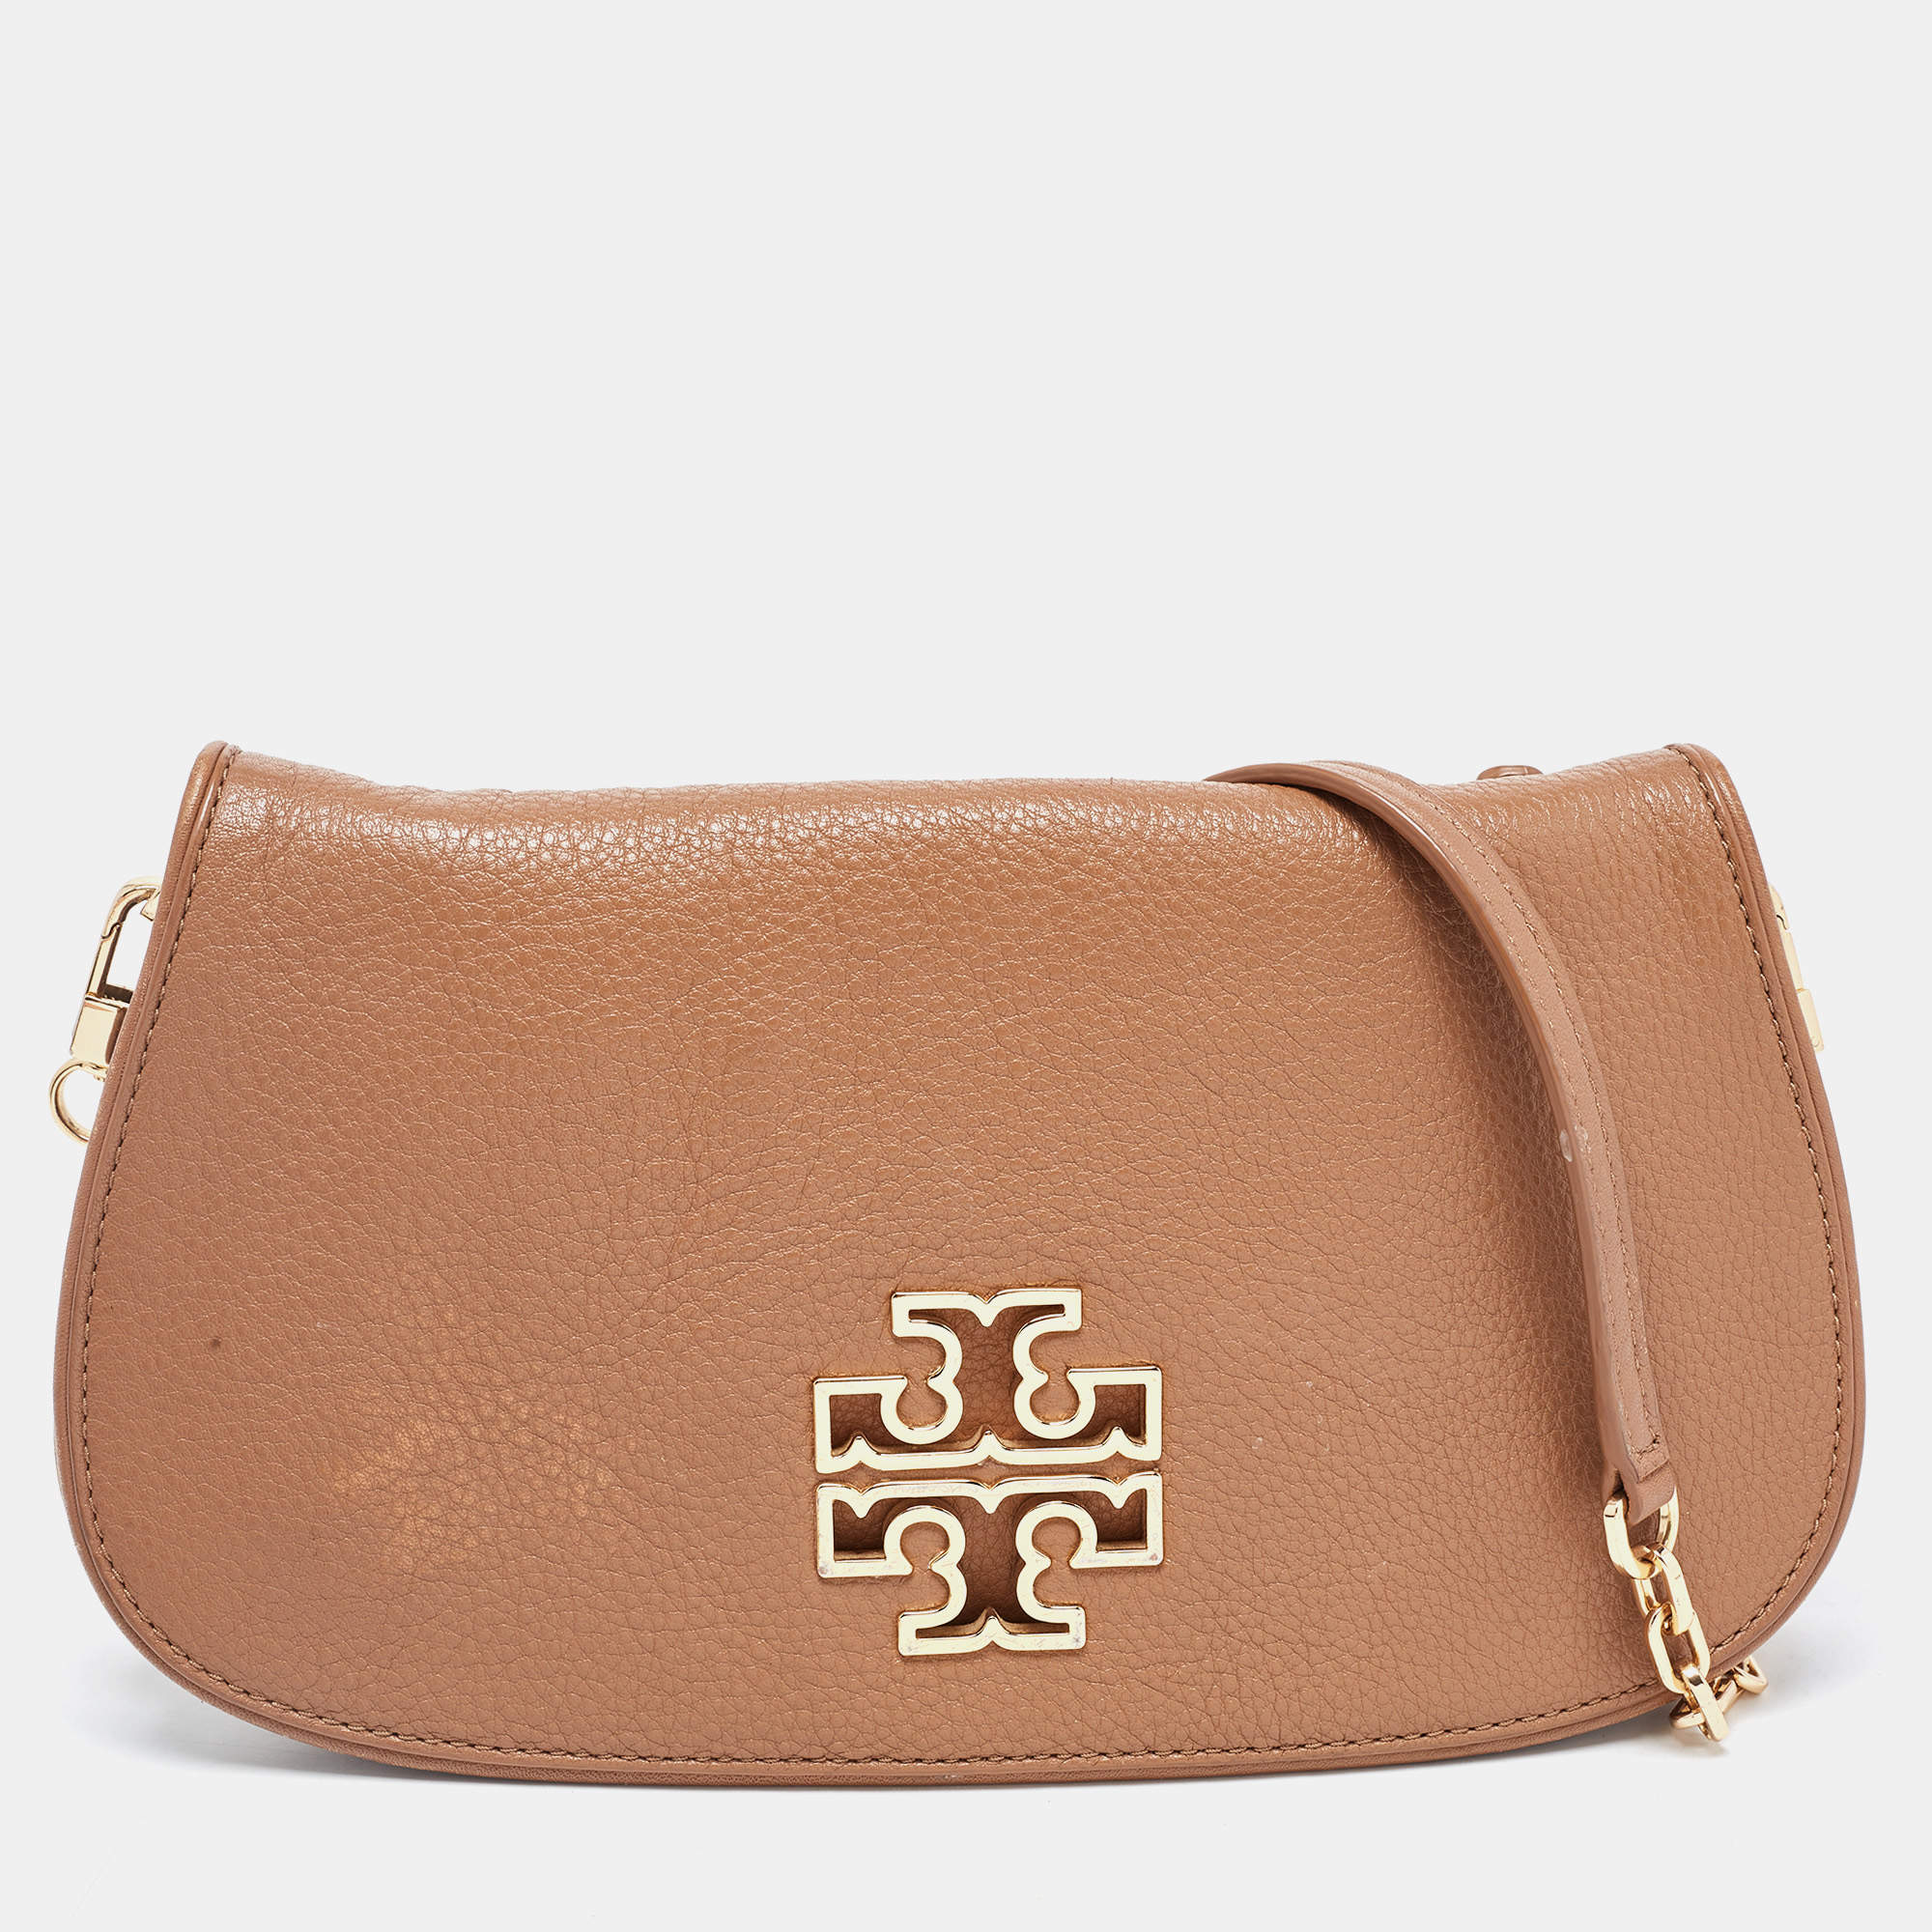 Tory Burch - Light Brown Pebbled Leather 